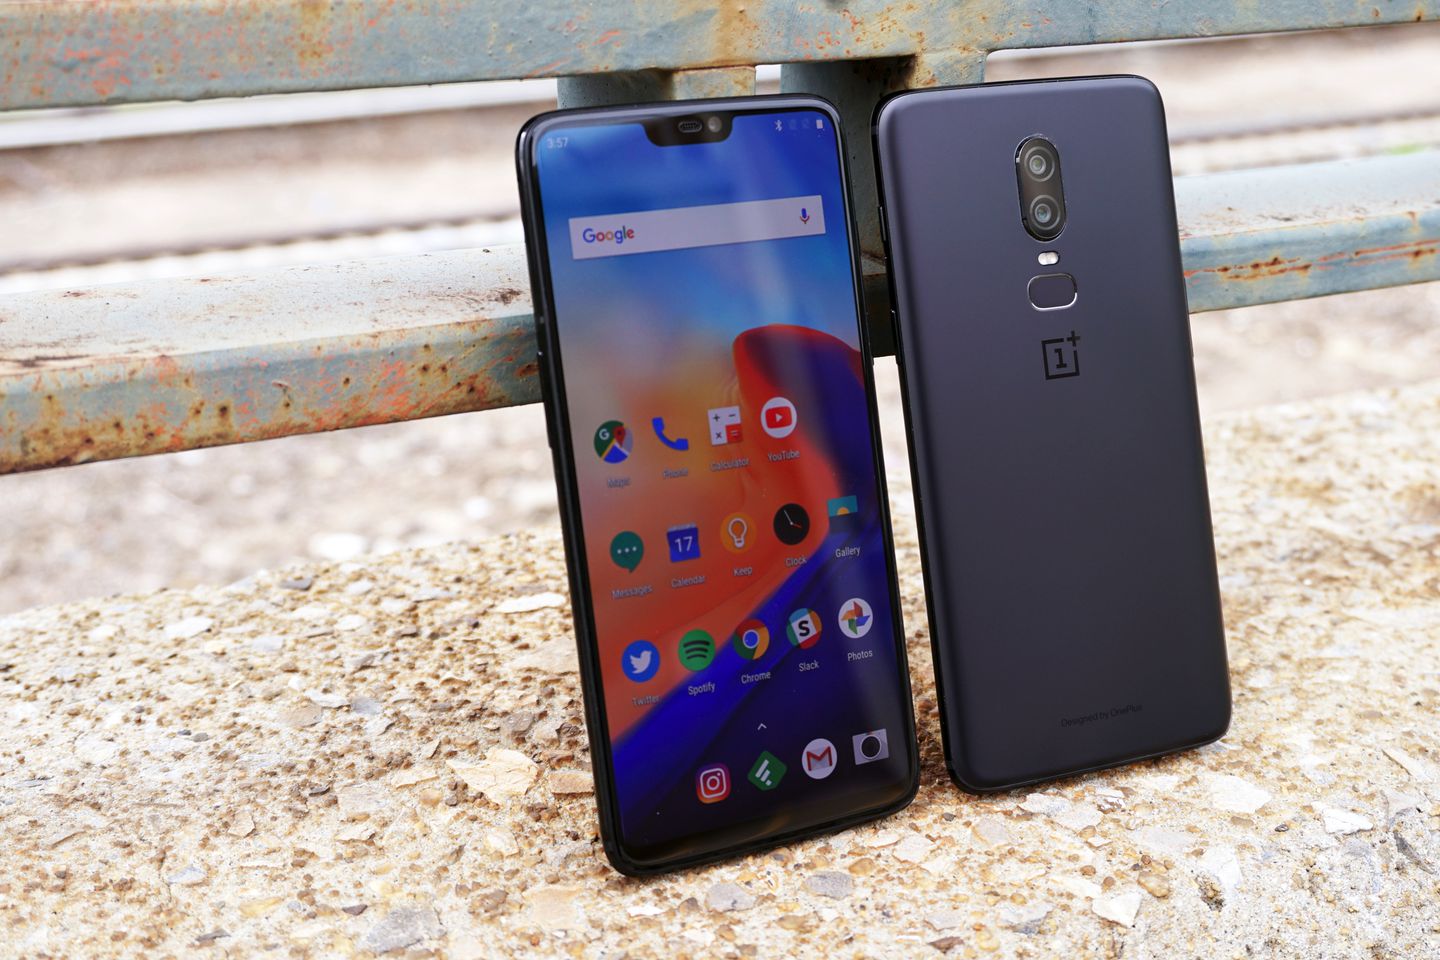 OnePlus 6, a rival of the iPhone X but with half the price